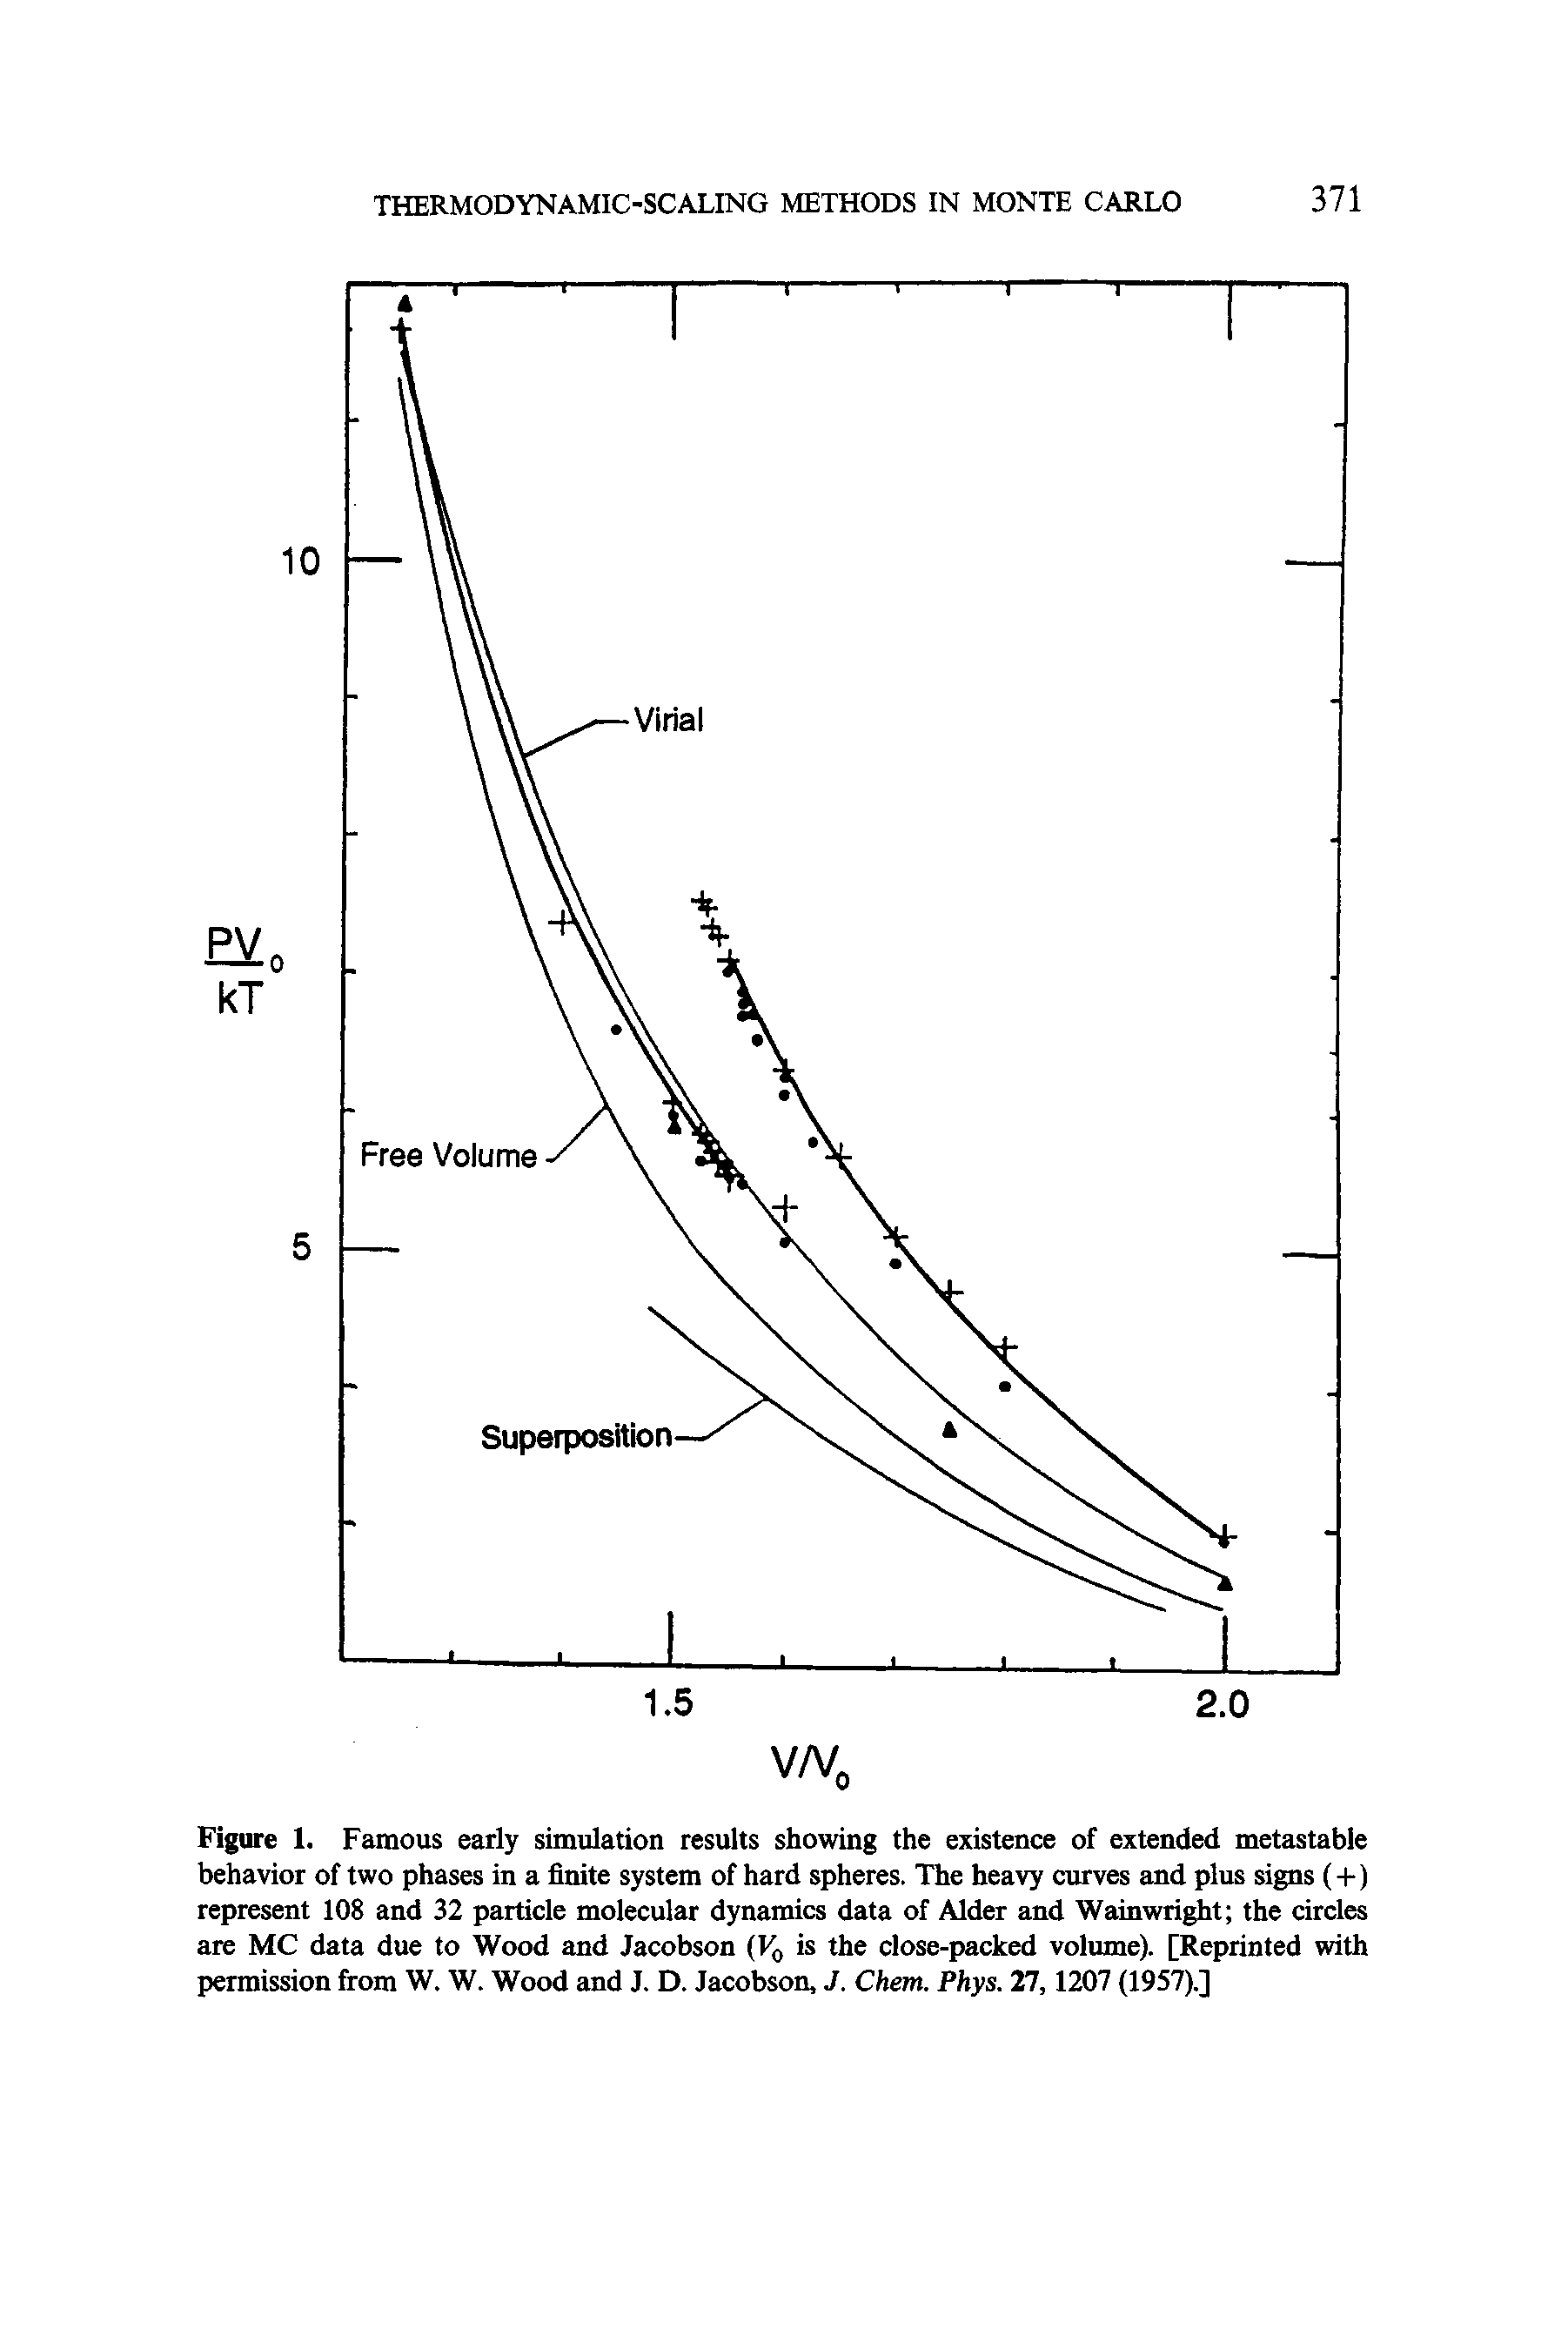 Figure 1. Famous early simulation results showing the existence of extended metastable behavior of two phases in a finite system of hard spheres. The heavy curves and plus signs (+) represent 108 and 32 particle molecular dynamics data of Alder and Wainwright the circles are MC data due to Wood and Jacobson (F0 is the close-packed volume). [Reprinted with permission from W. W. Wood and J. D. Jacobson, J. Chem. Phys. 27,1207 (1957).]...